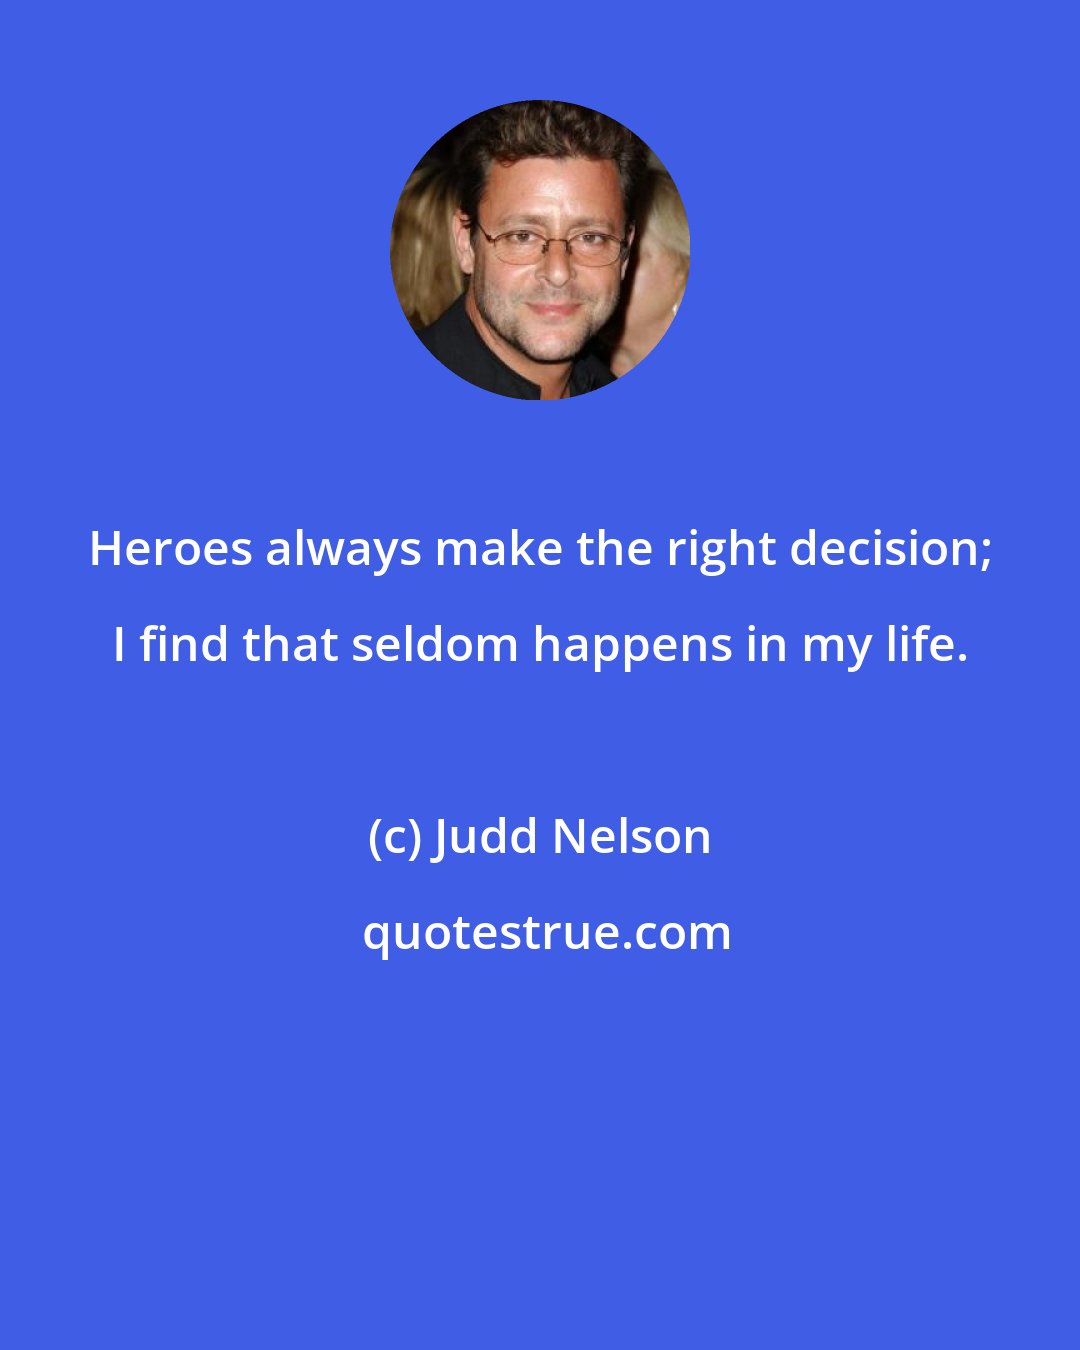 Judd Nelson: Heroes always make the right decision; I find that seldom happens in my life.